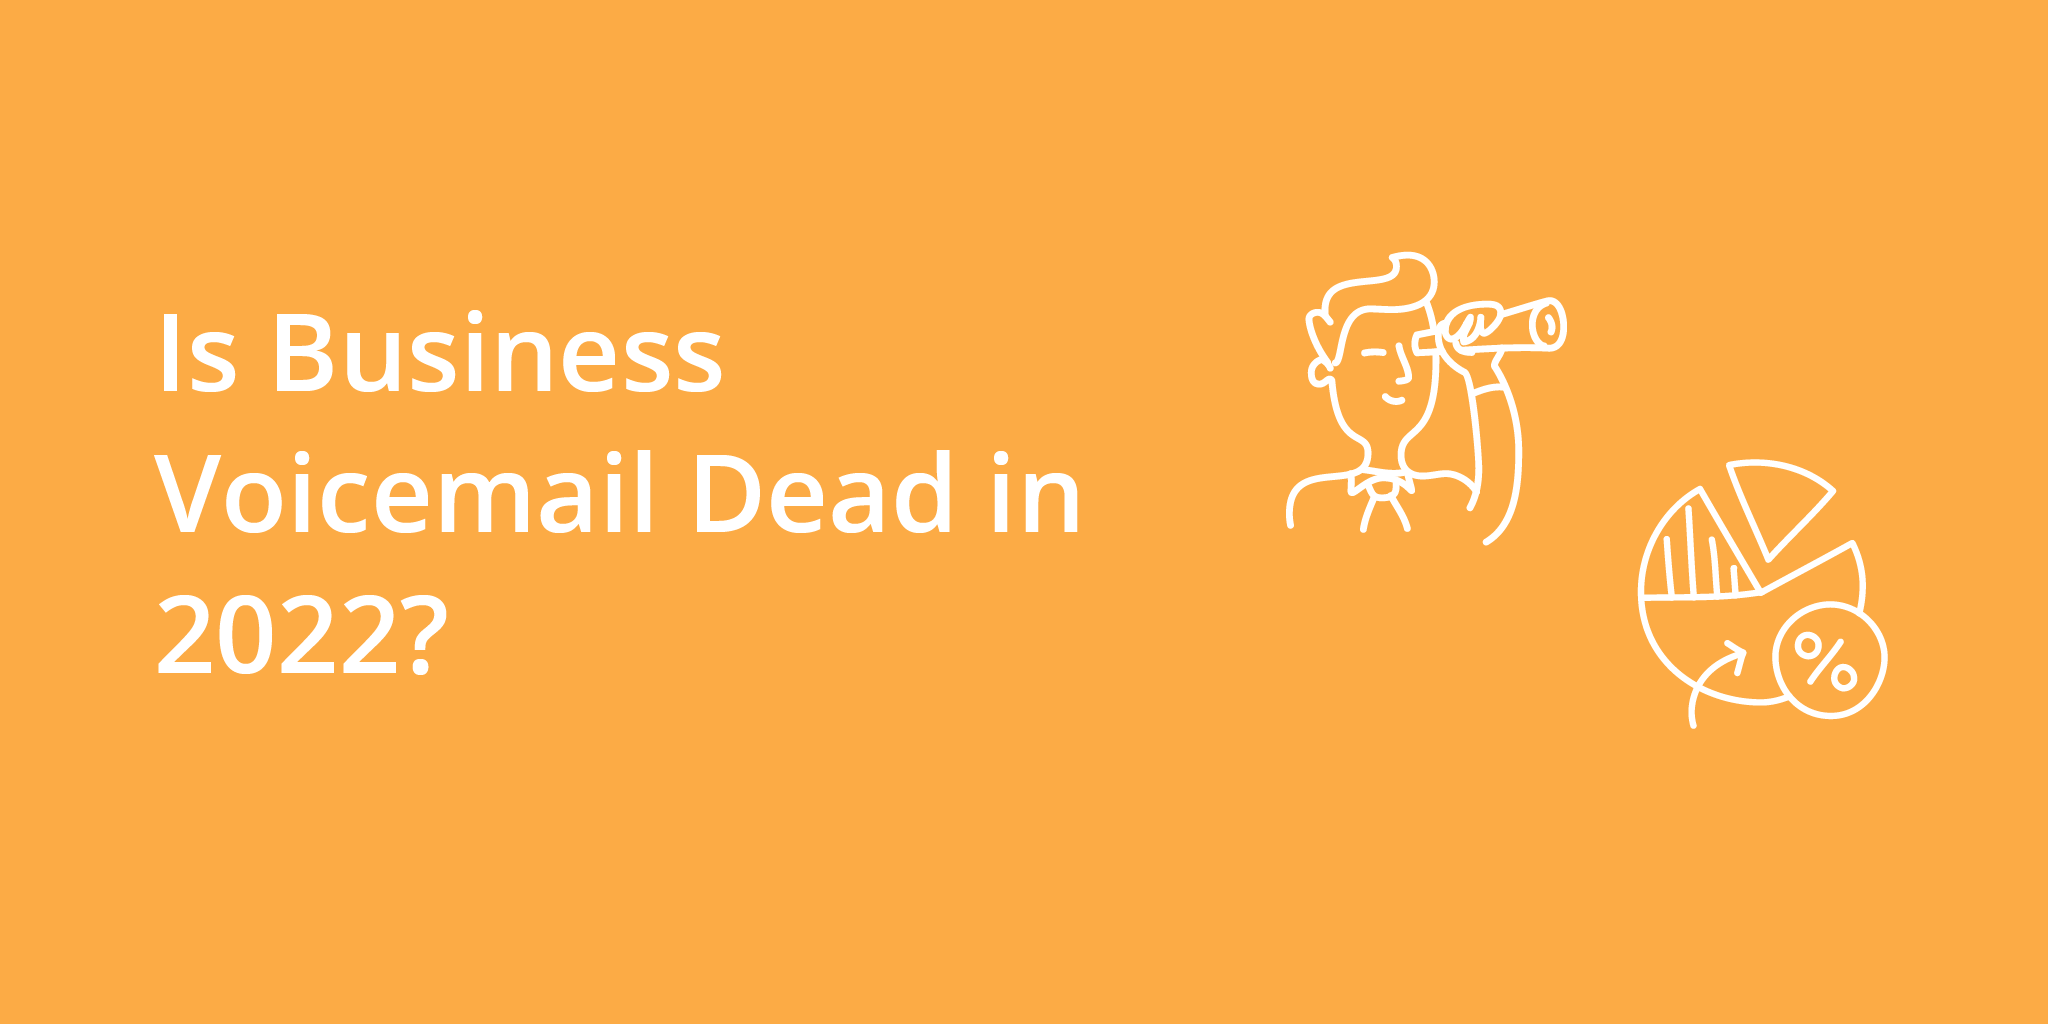 Is Business Voicemail Dead in 2022?